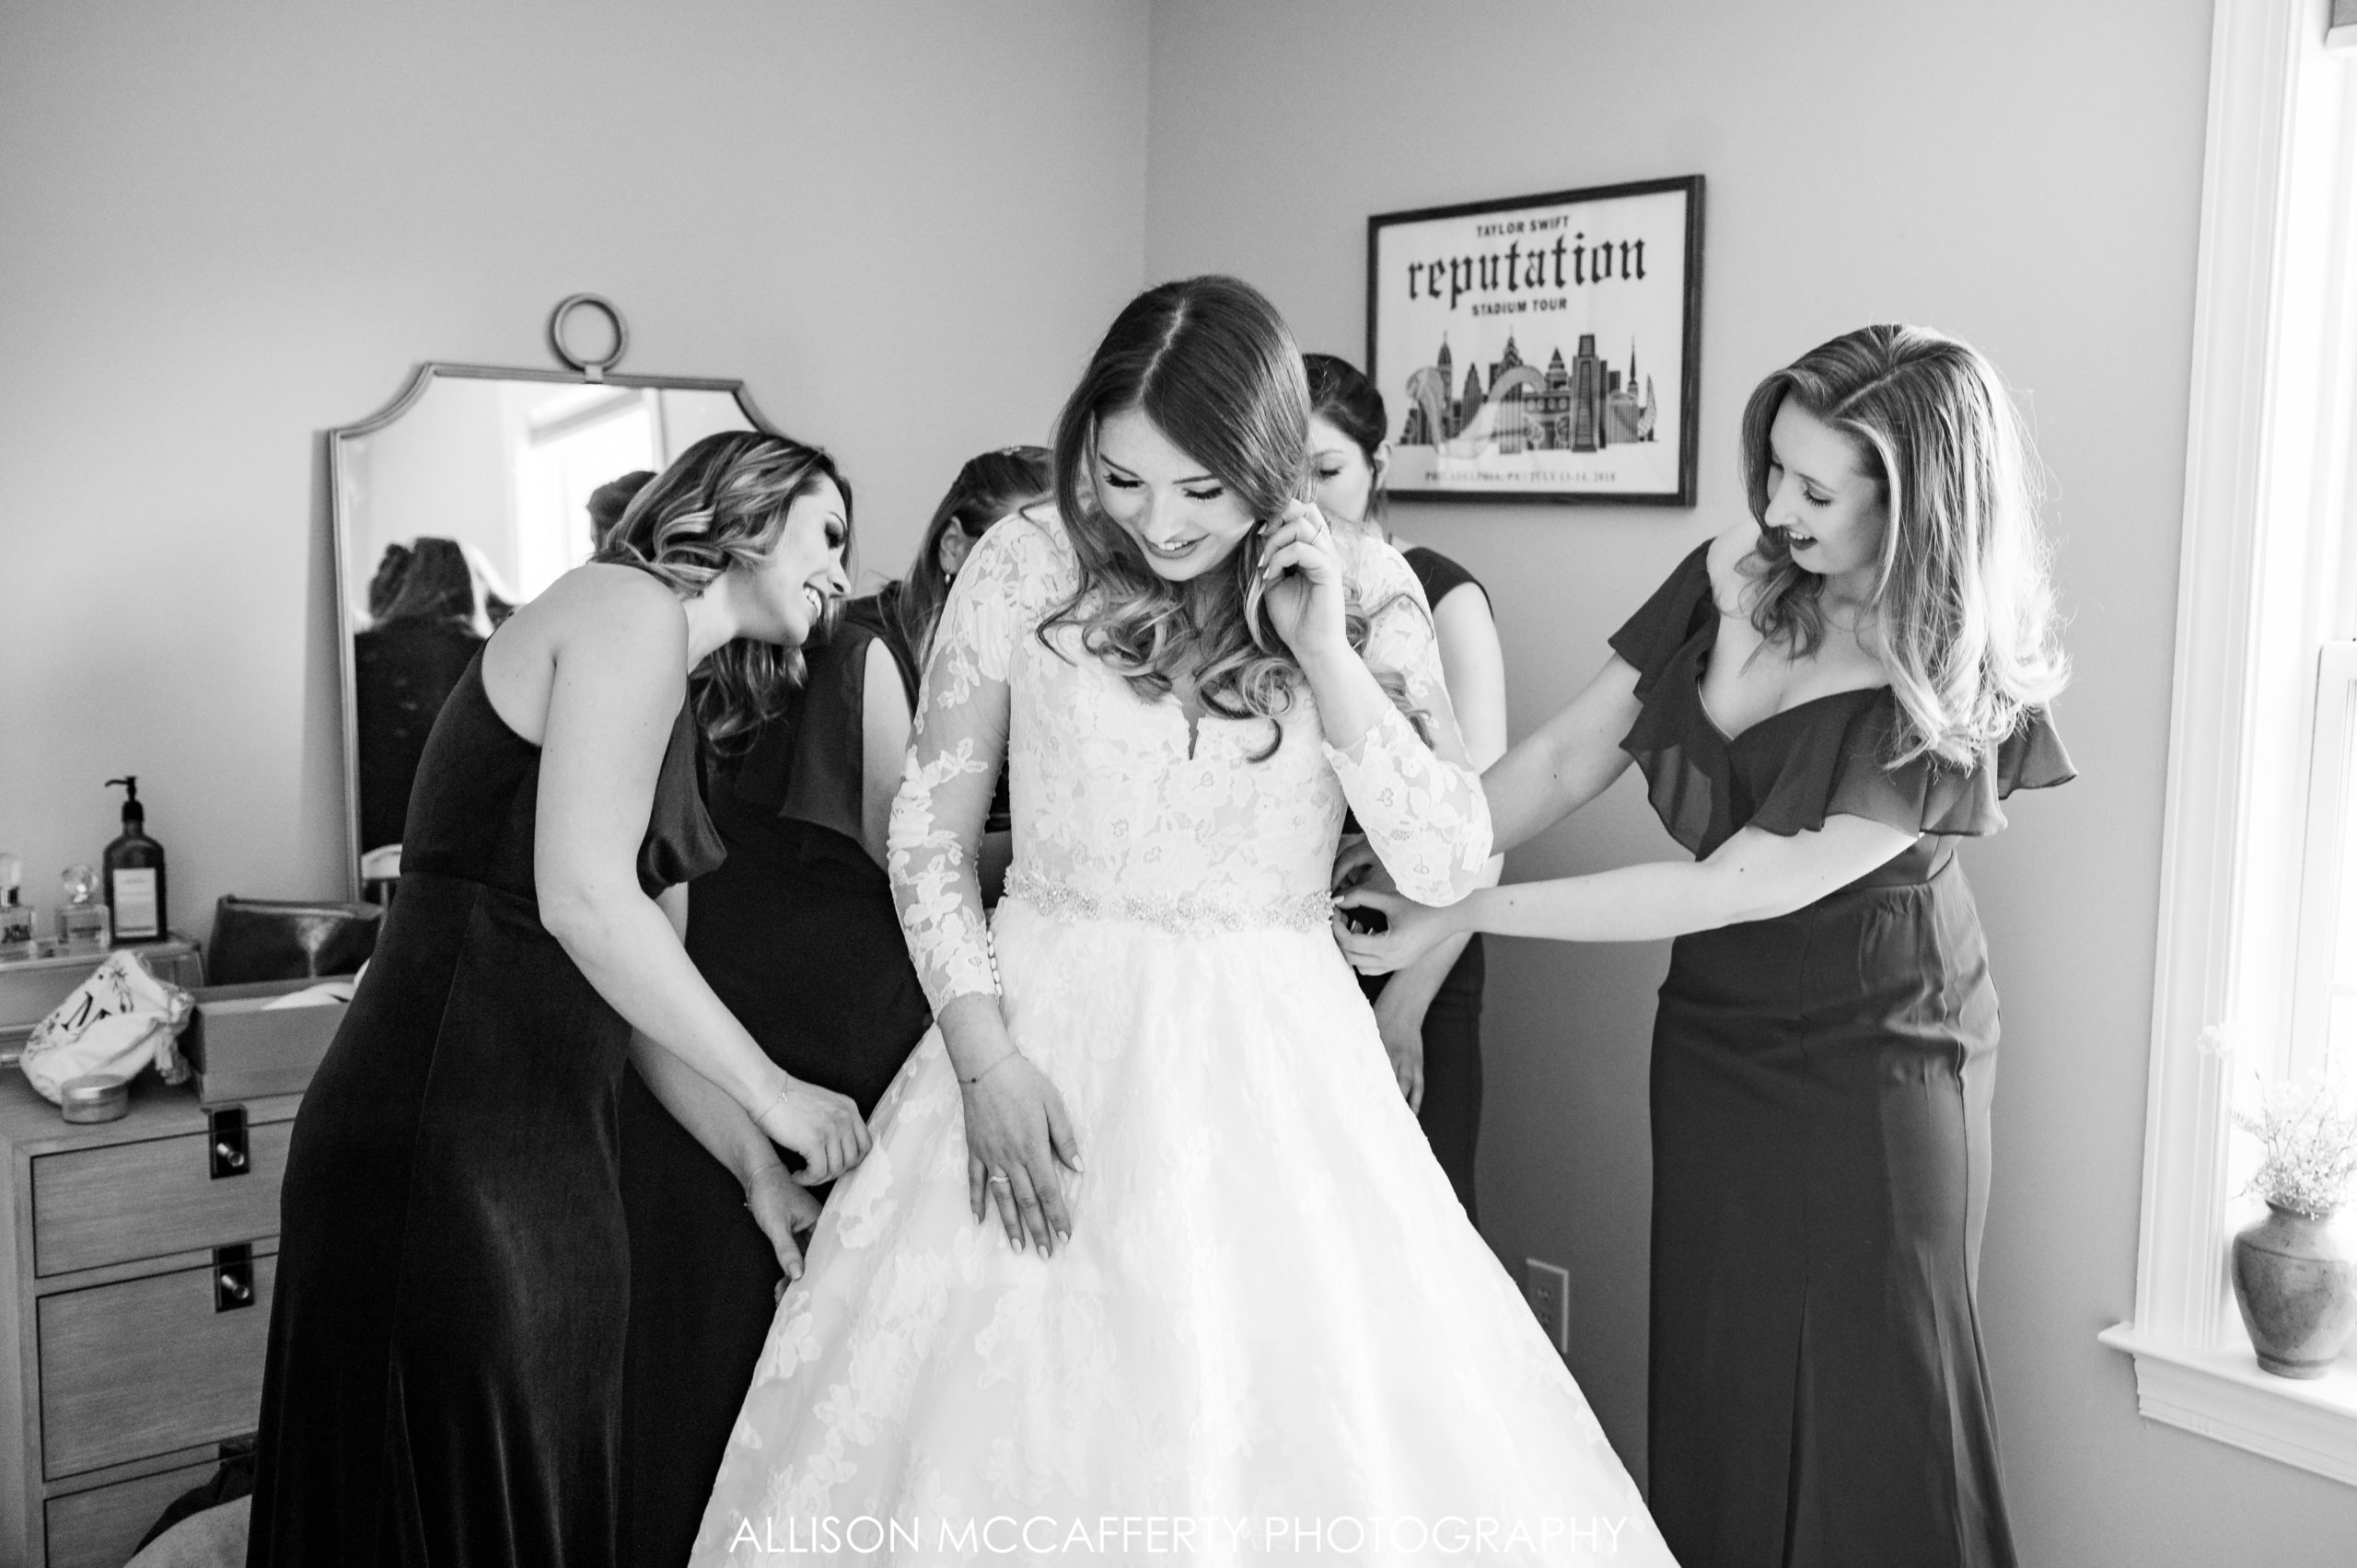 Wedding Day Photos in Black and White